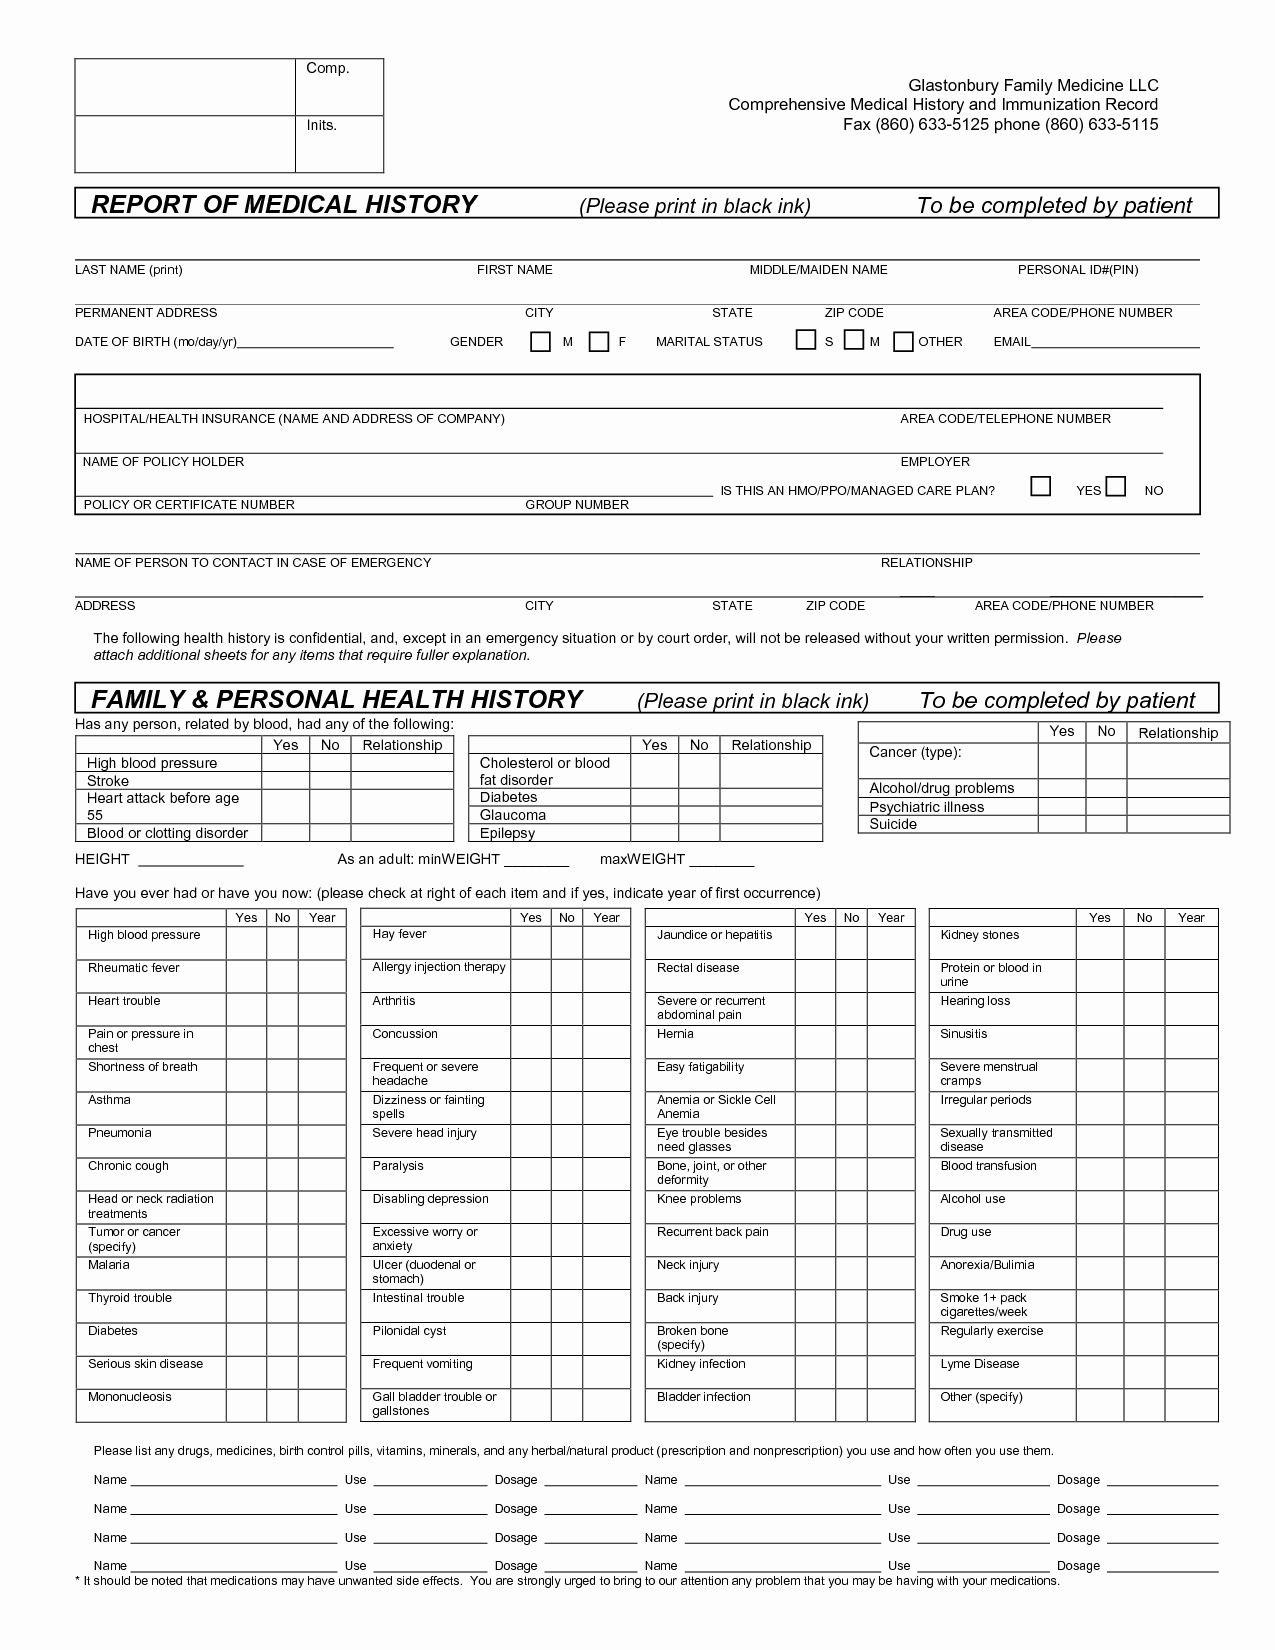 Health History form Template Fresh Report Of Medical History Family Personal Health History